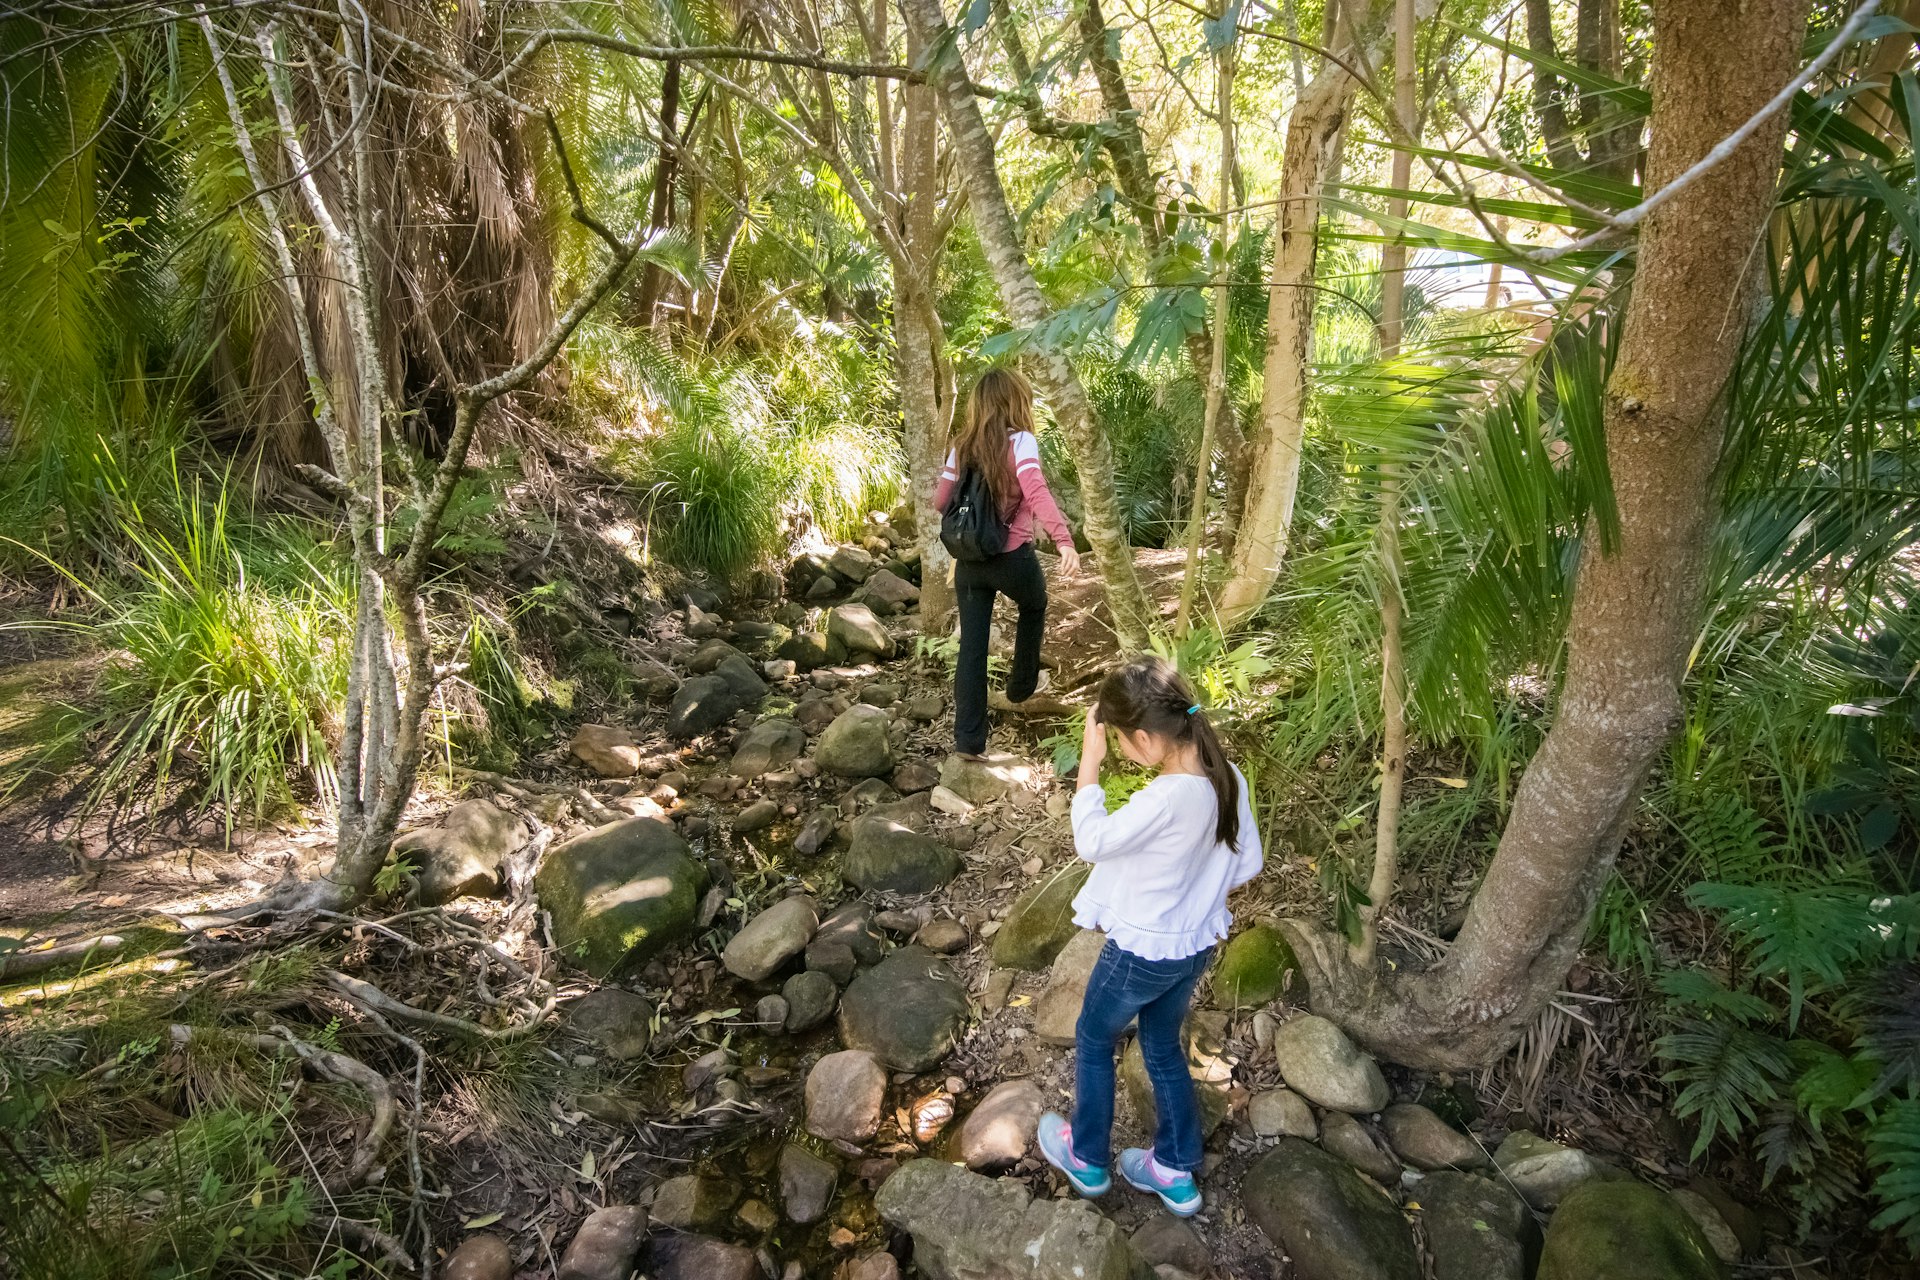 A mother and her daughter walking/hiking through the lush vegetation of Kirstenbosch Garden in Cape Town, South Africa